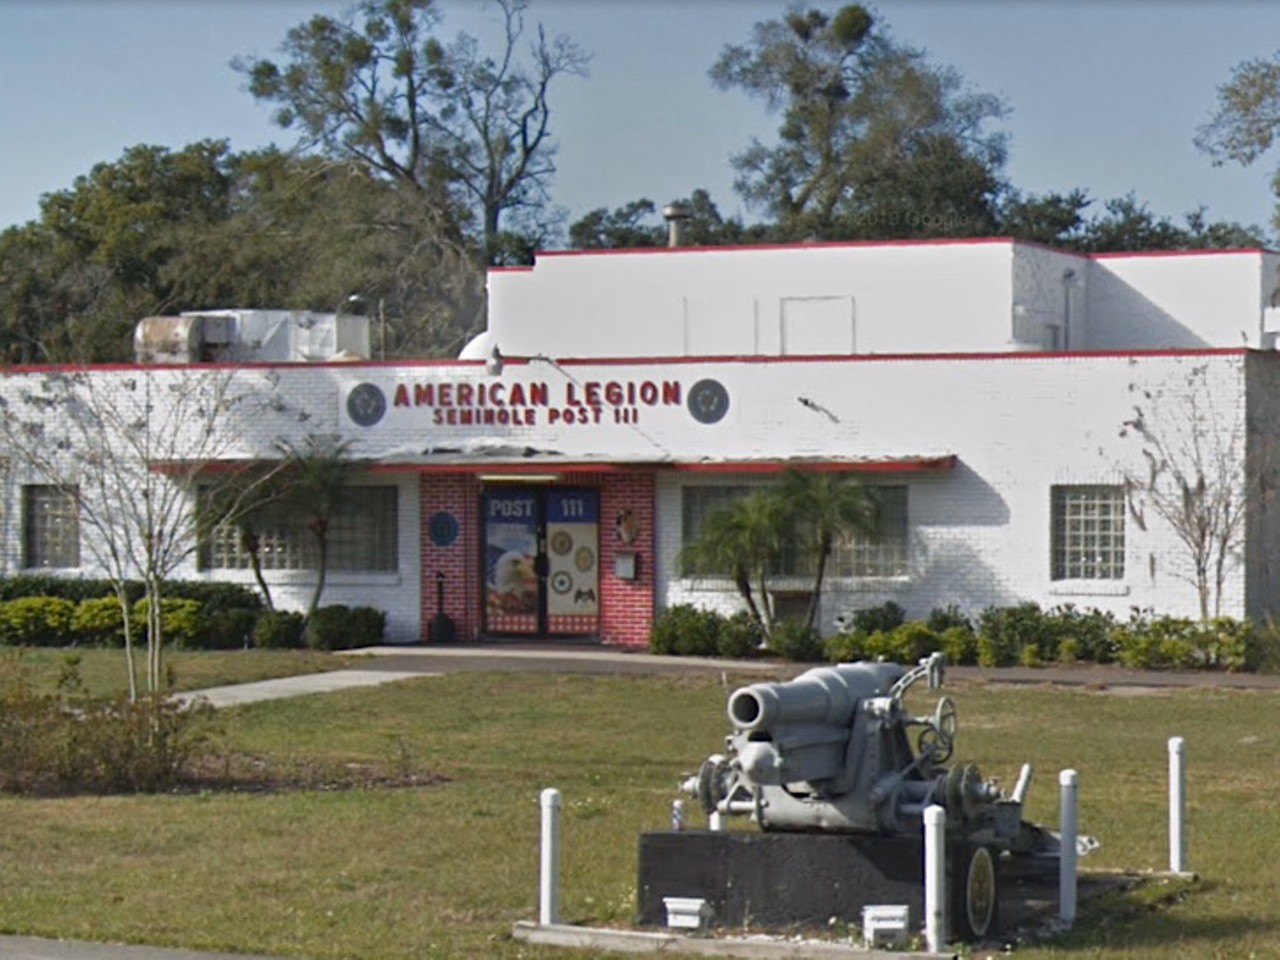 American Legion Seminole Post 111  
6918 N Florida Ave, Tampa
This haven for cheap drinks also has a swear jar, dance nights, open-minded regulars, and a steady rotation of America’s best touring underground rock acts.—Ray Roa
Photo via Photo via Google Maps